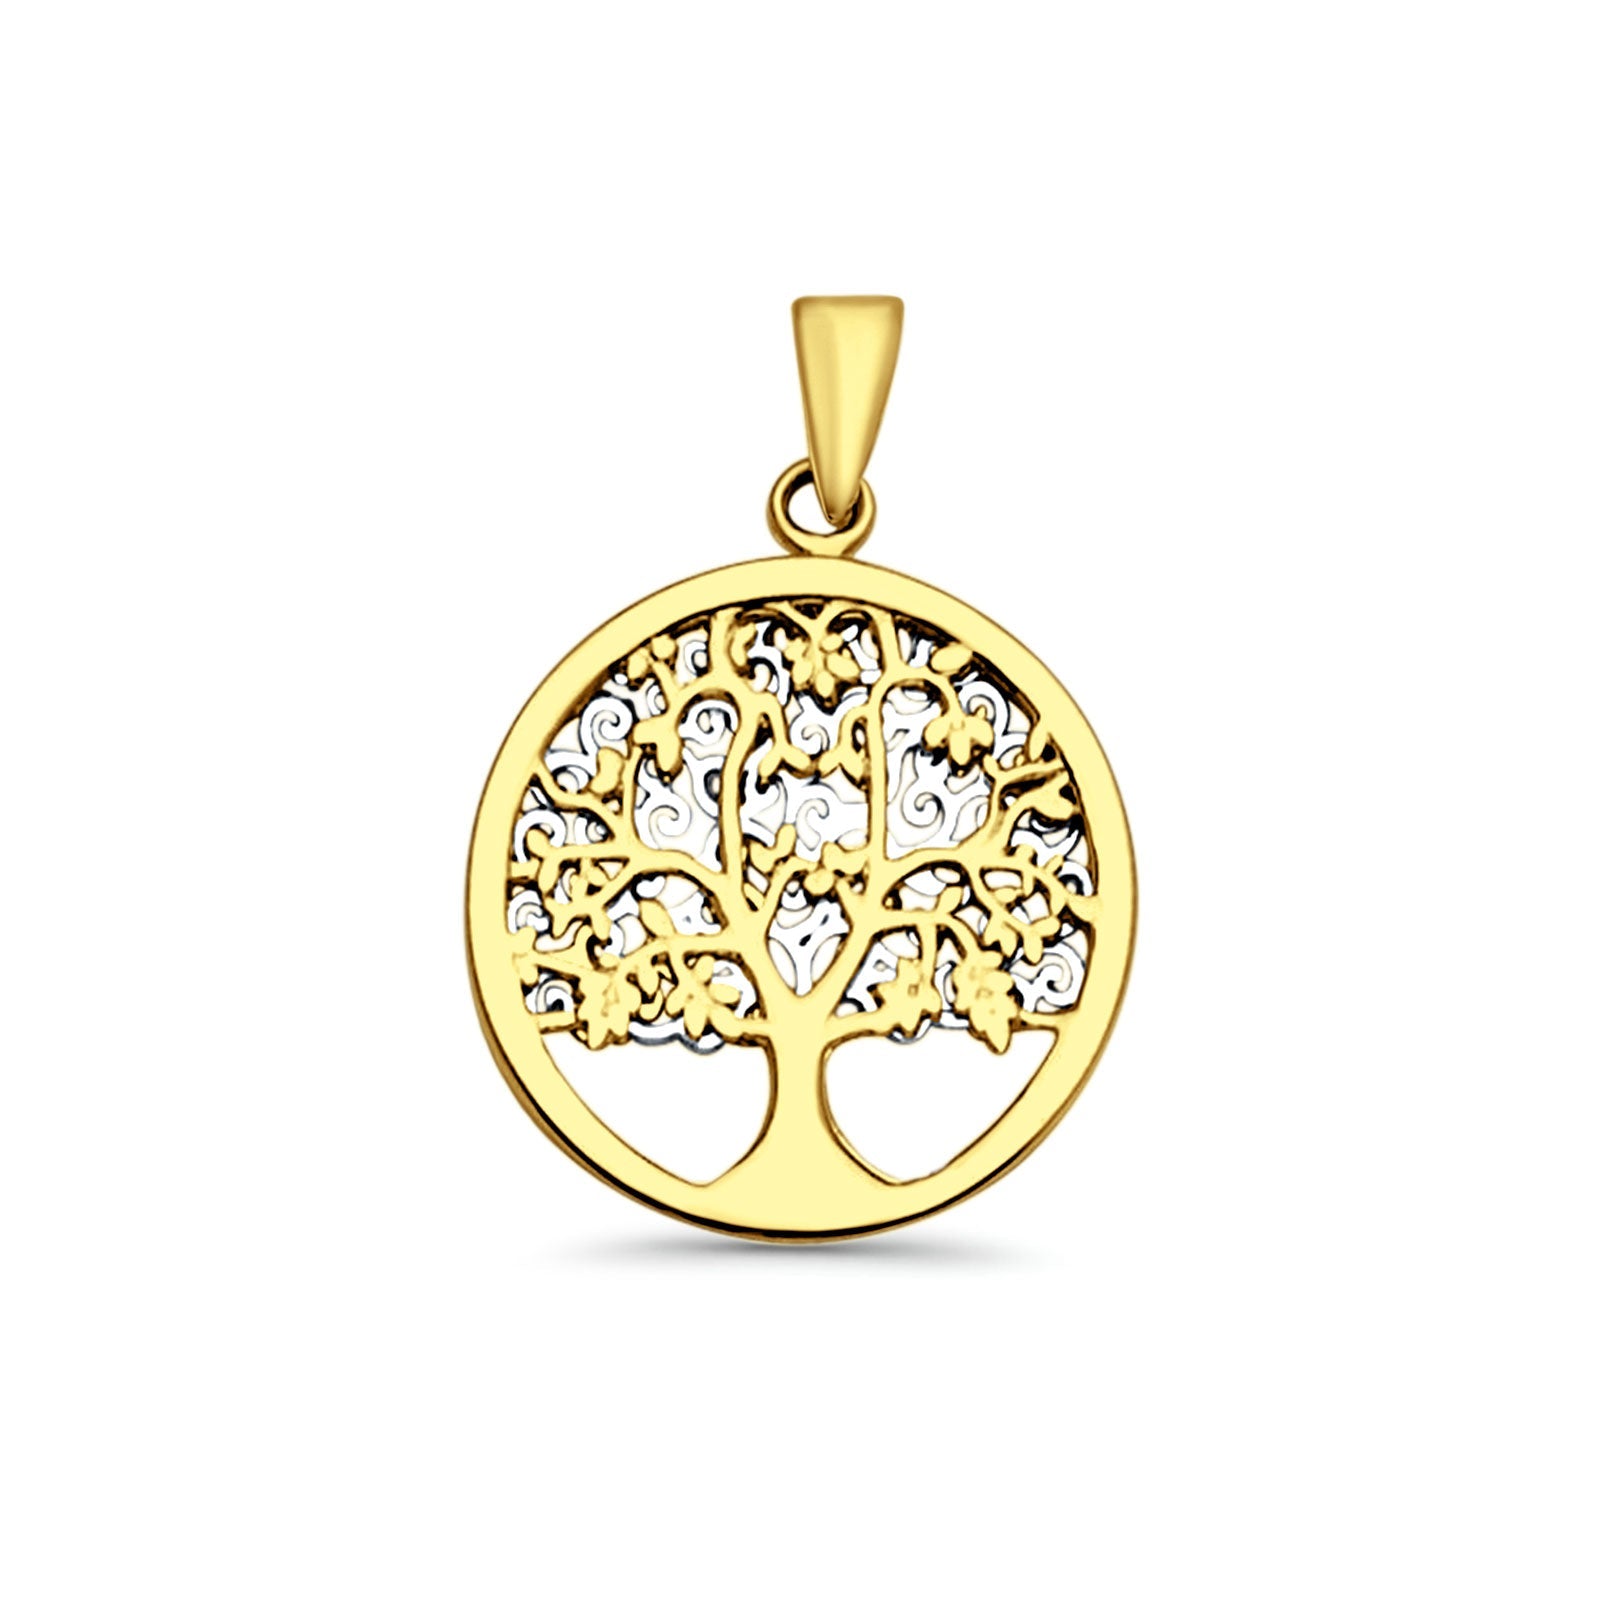 14K Two Color Gold Family Tree Pendant 25mmX17mm With 16 Inch To 20 Inch 1.0MM Width D.C. Round Wheat Chain Necklace